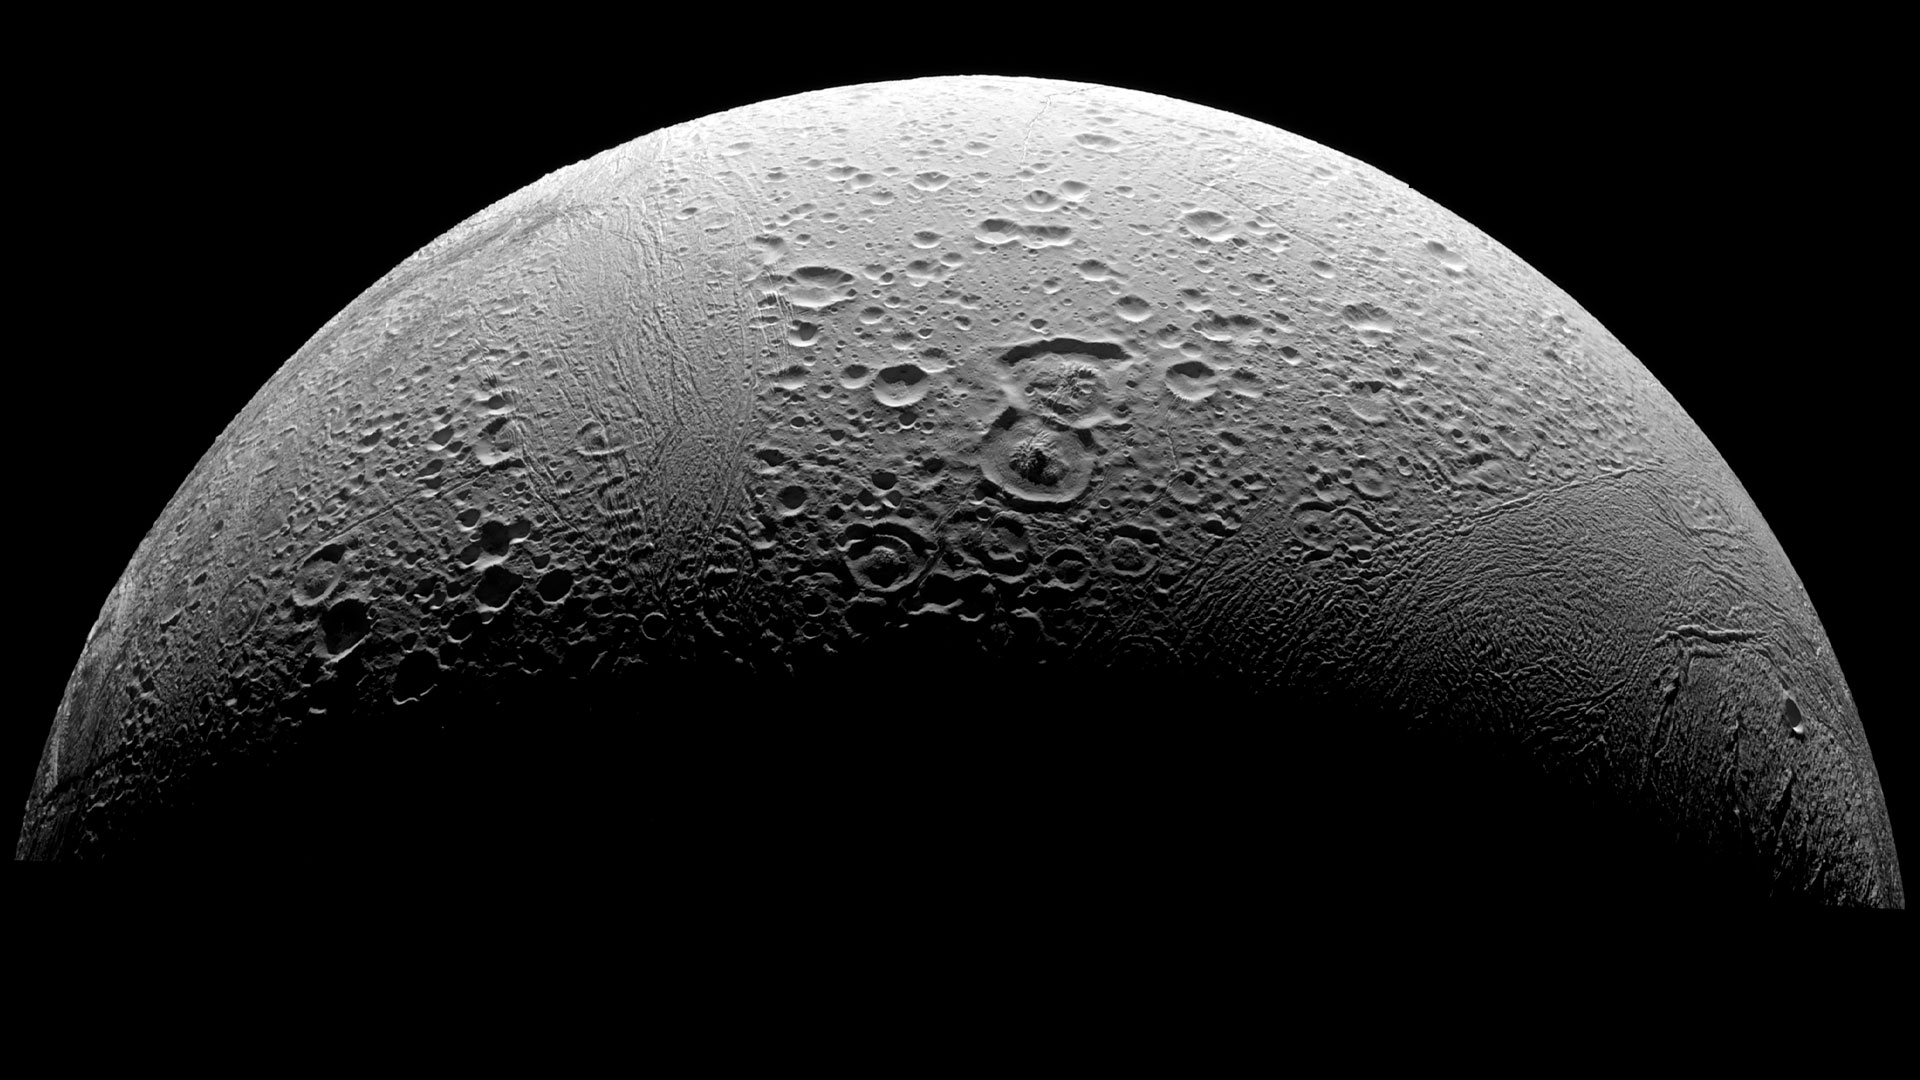 Scientists believe that ocean on Saturn’s Moon contains an essential element for life.